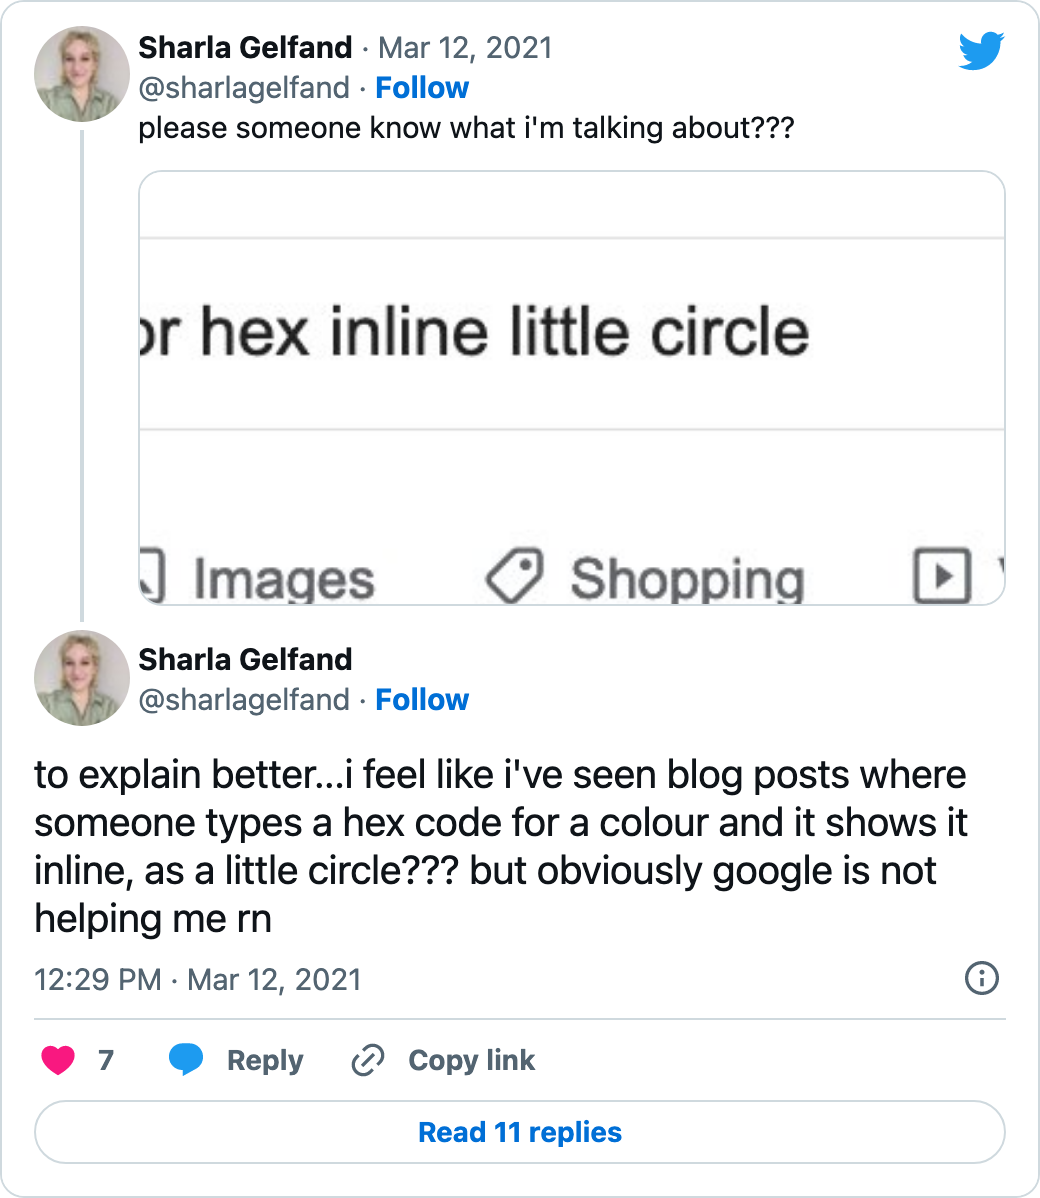 please someone know what I'm talking about? to explain better...i feel like i've seen blog posts where someone types a hex code for a colour and it shows it inline, as a little circle??? but obviously google is not helping me rn